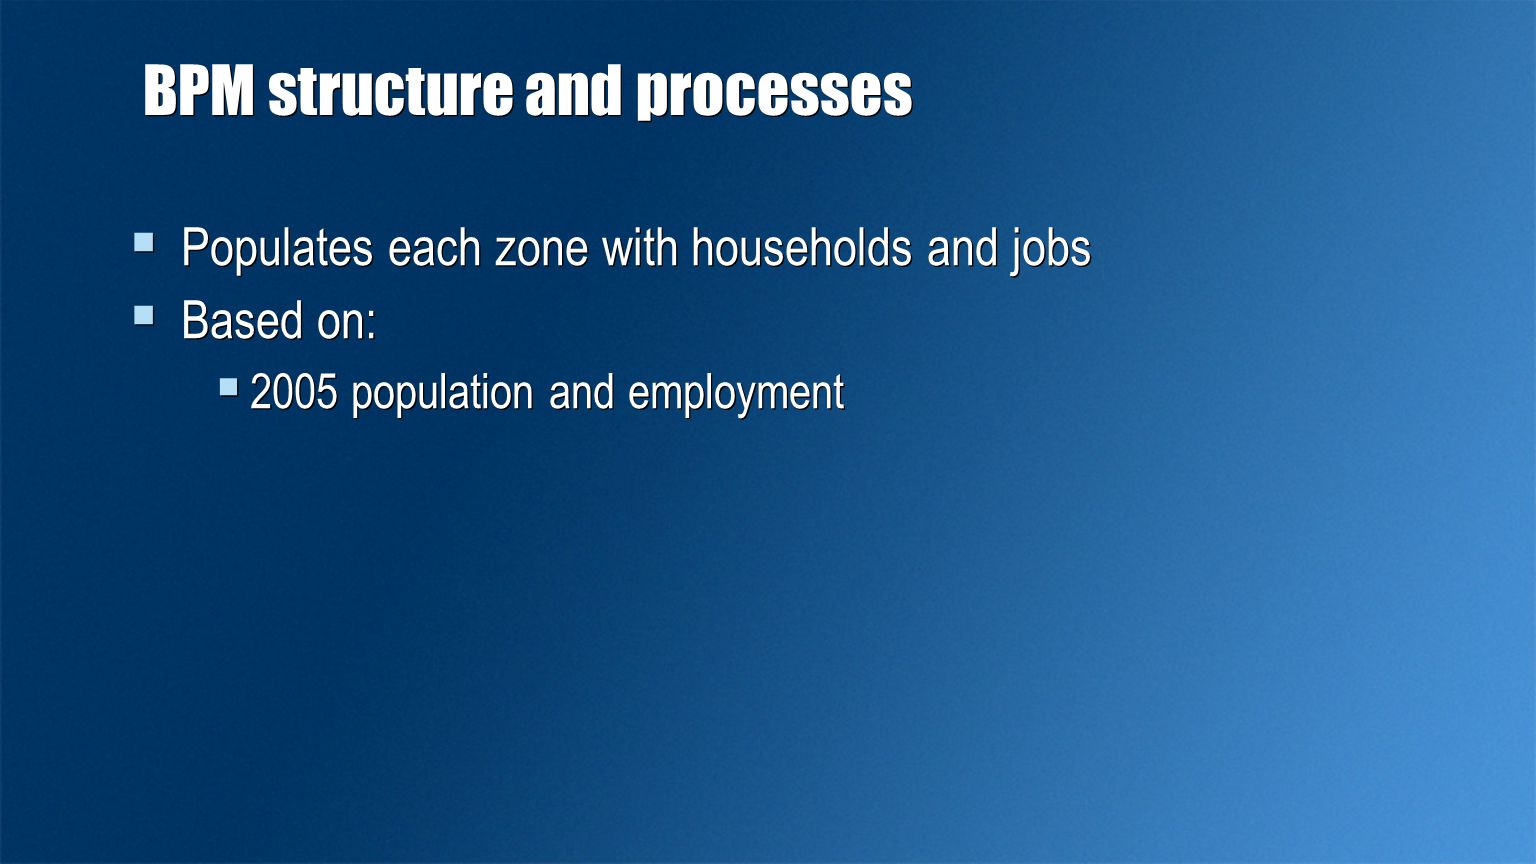 BPM structure and processes  Populates each zone with households and jobs  Based on:  2005 population and employment  Populates each zone with households and jobs  Based on:  2005 population and employment